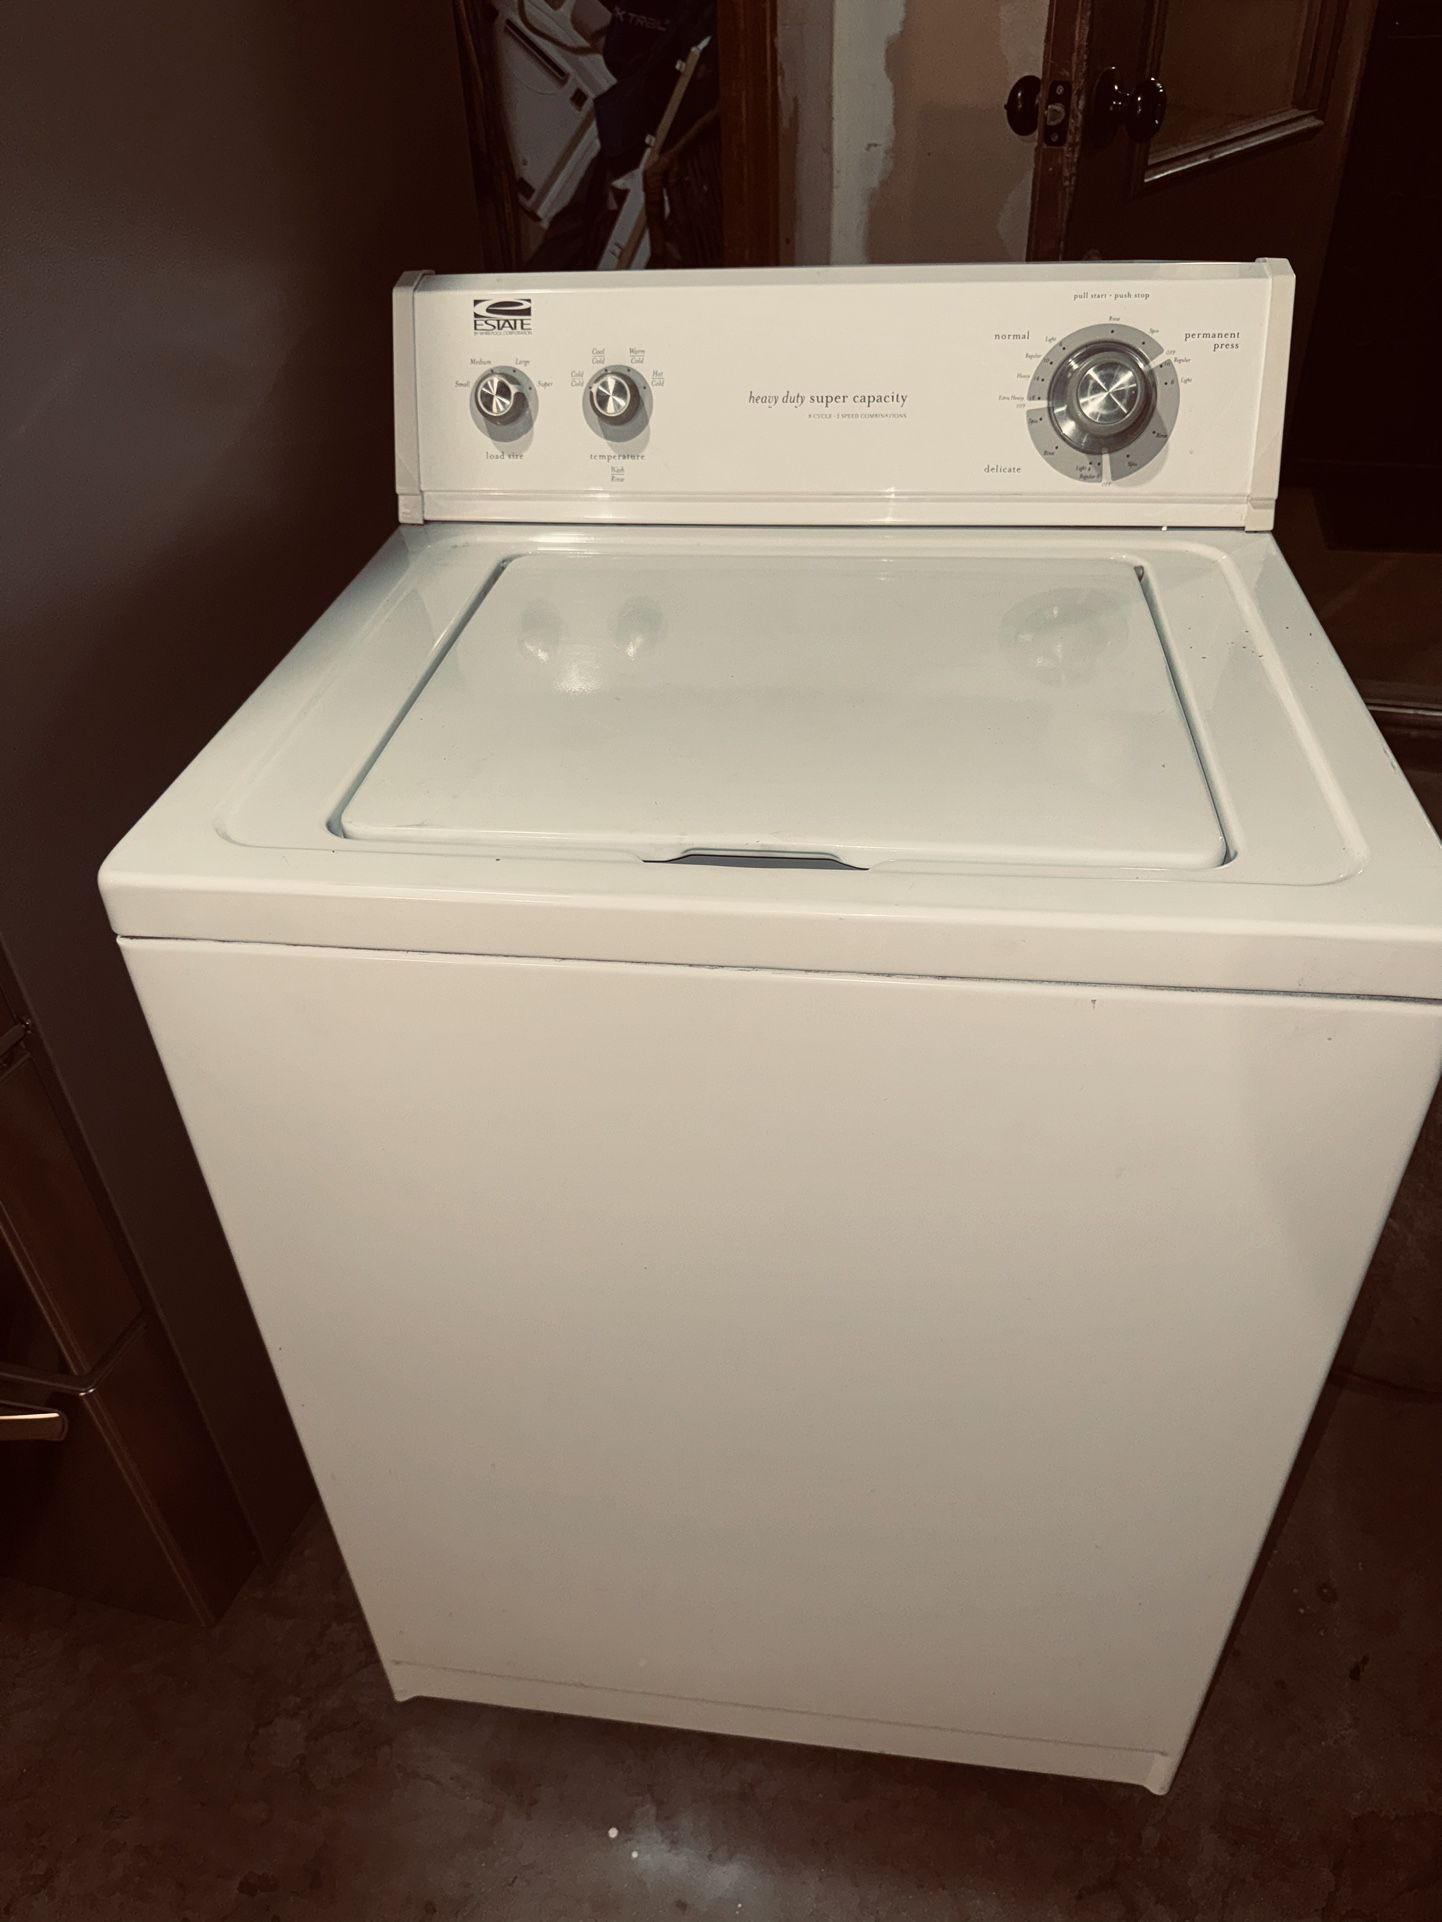 By Whirlpool Washer Works Perfect 3 Month Warranty We Deliver 